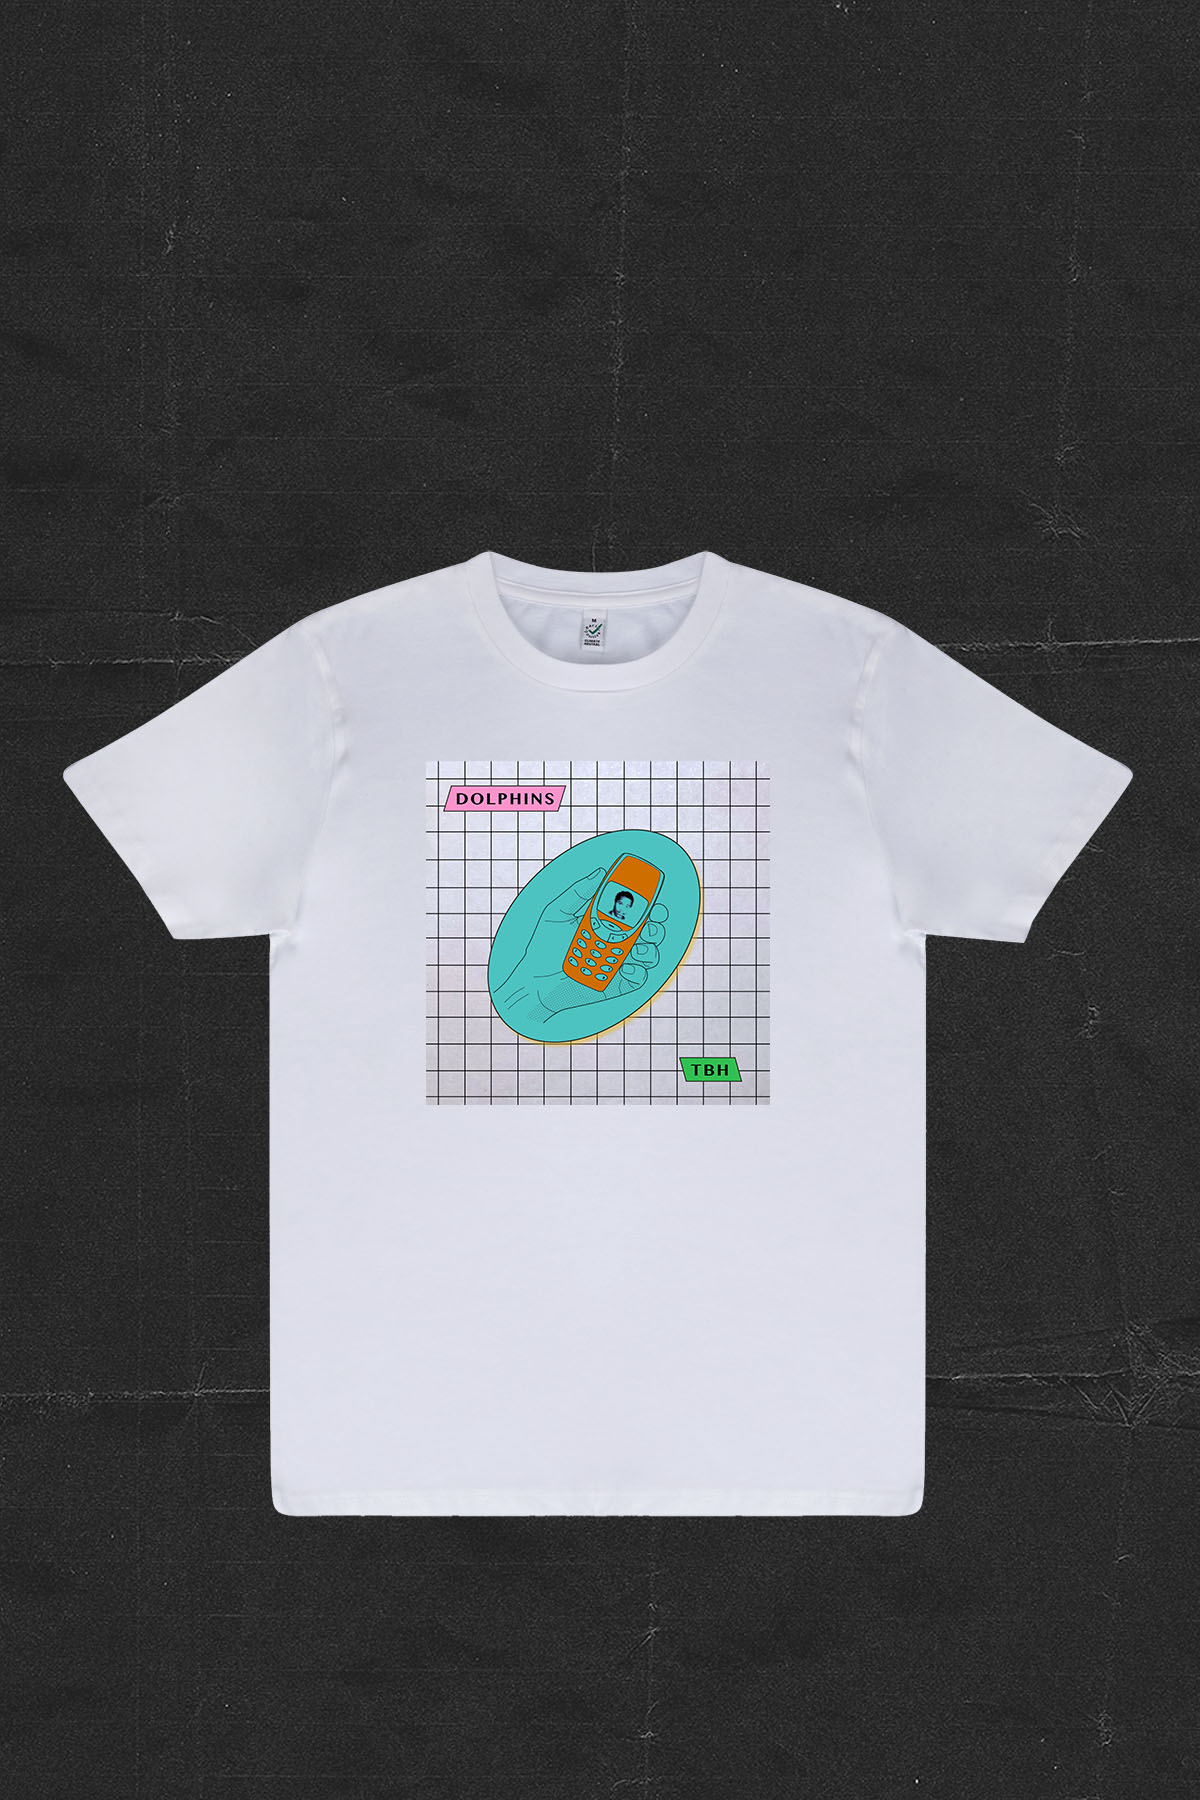 Dolphins - TBH | T-Shirt